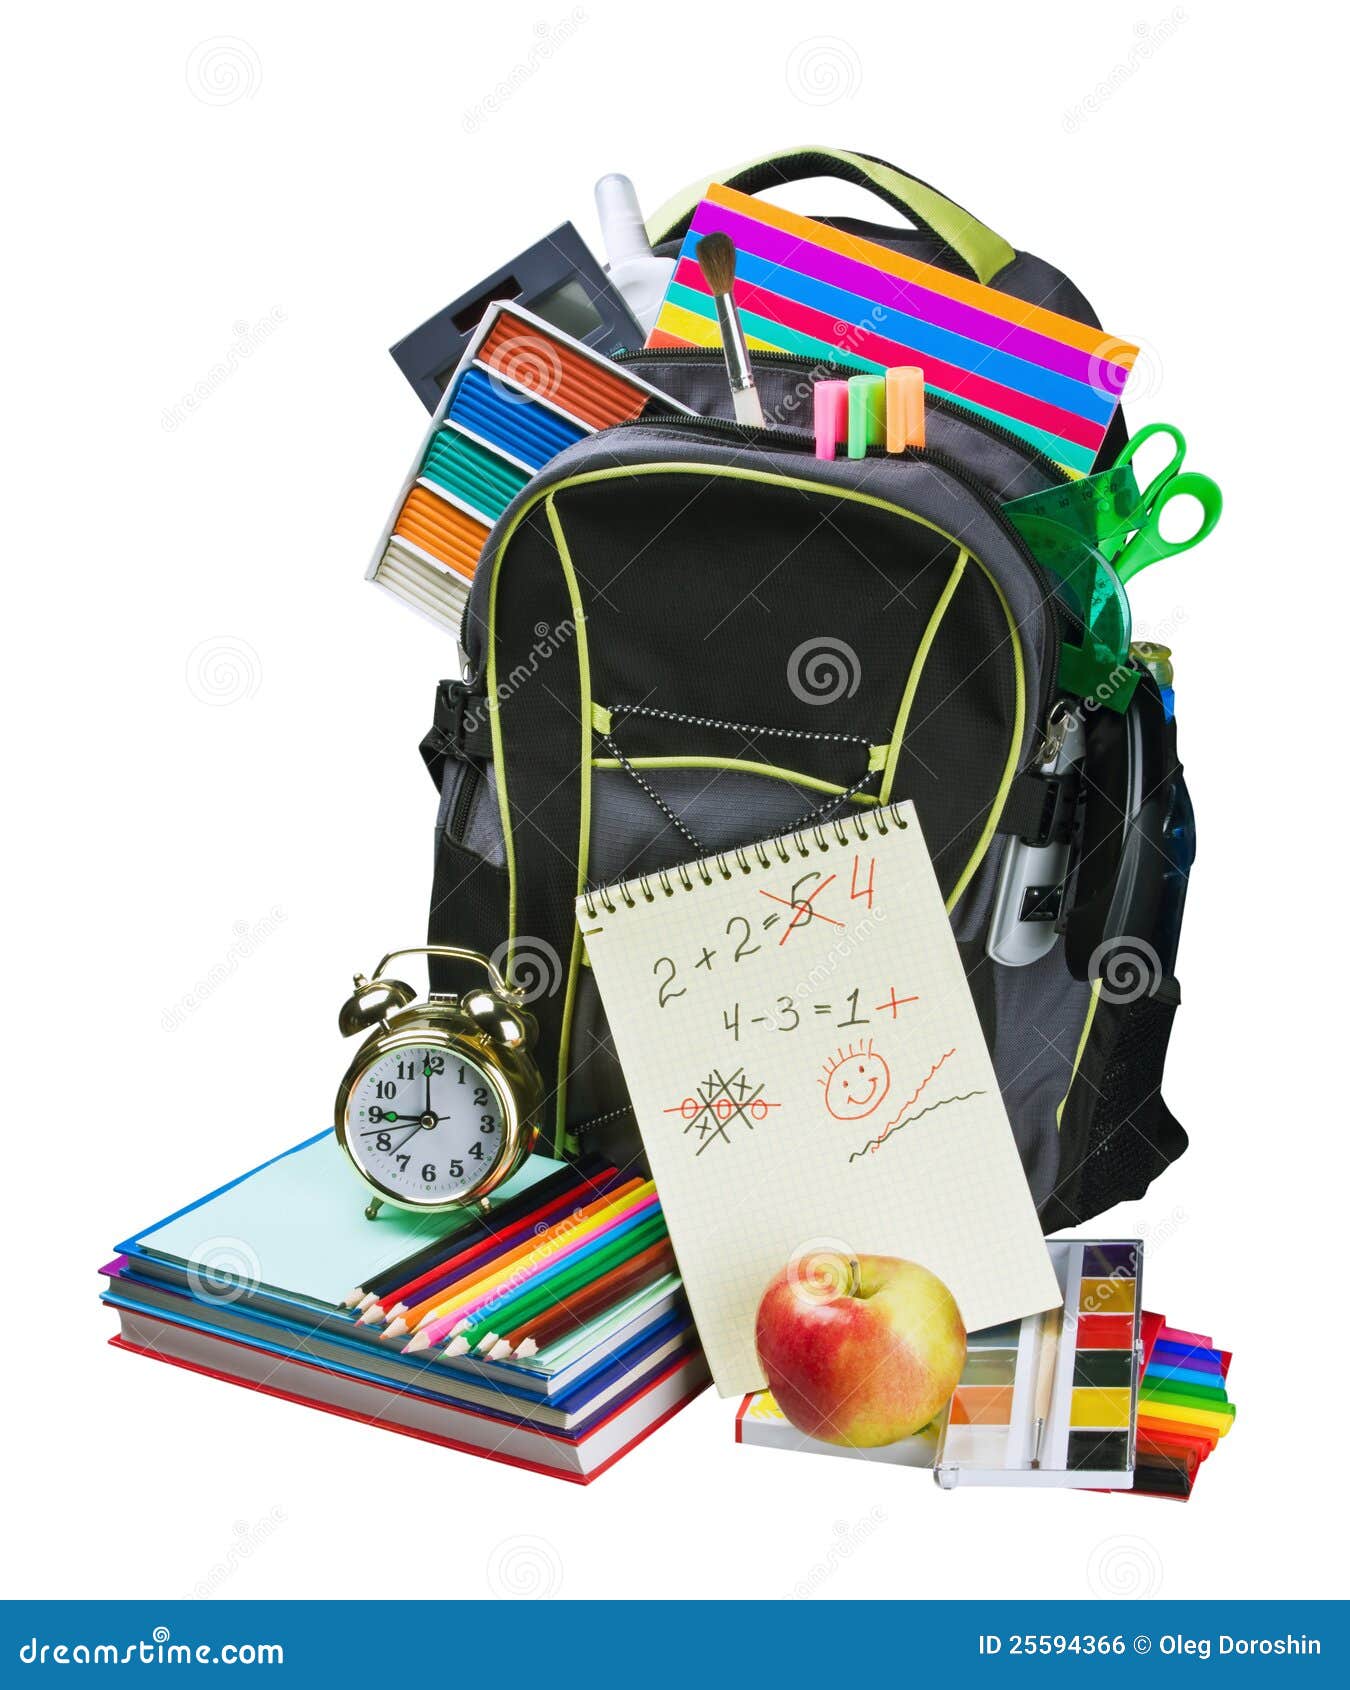 More similar stock images of ` Backpack full of school supplies `